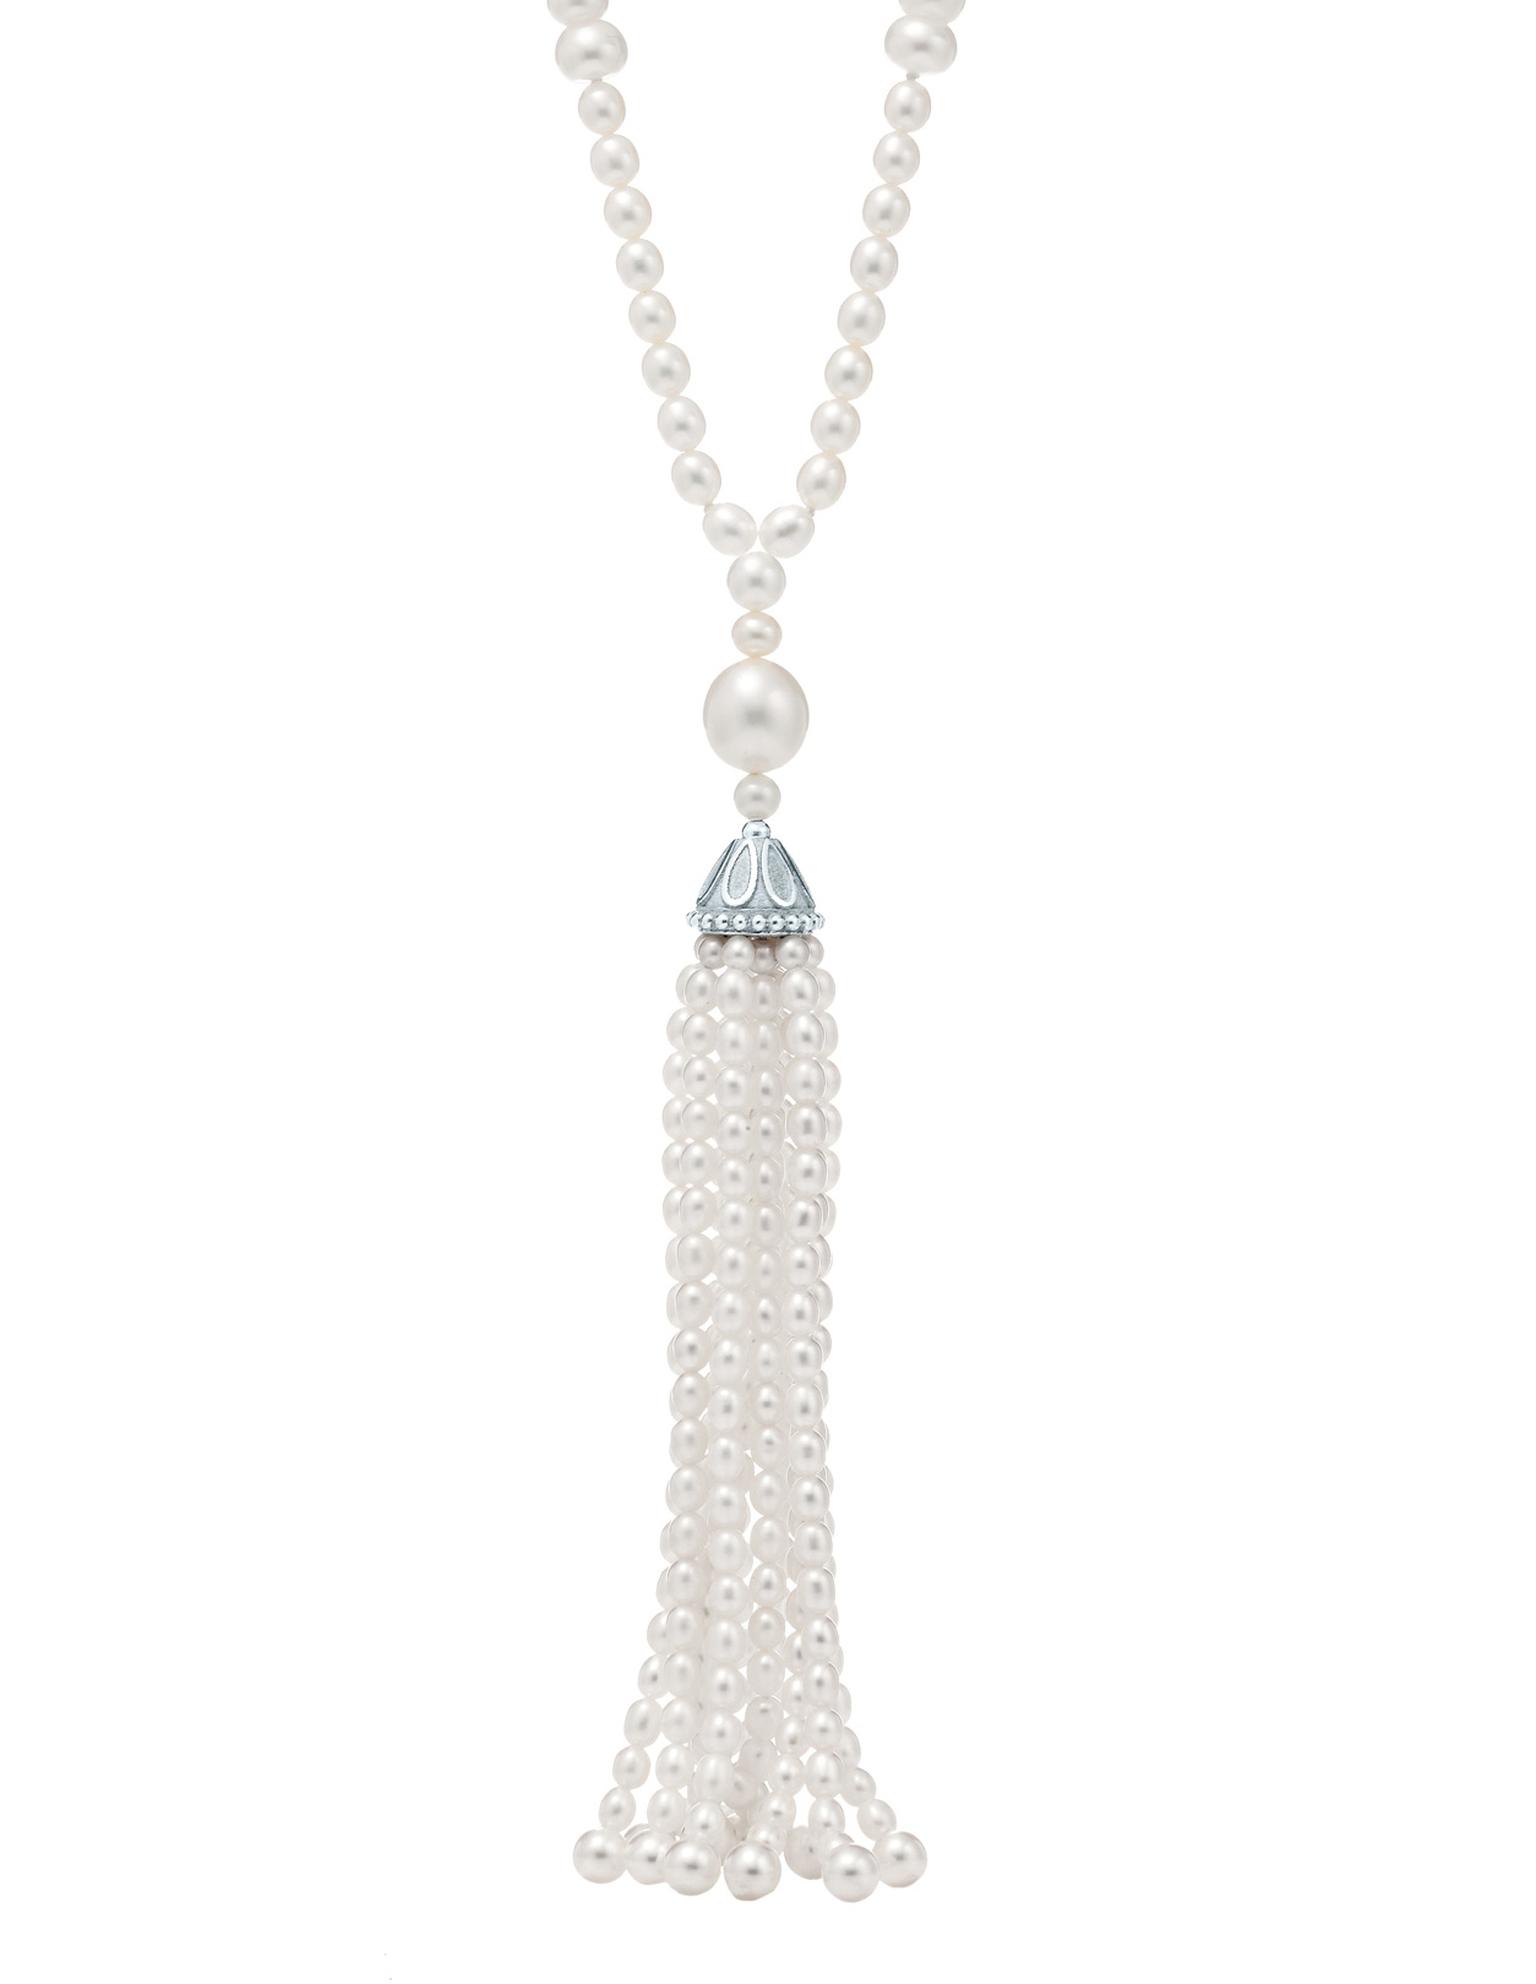 Ziegfeld-tassel-necklace-of-cultured-freshwater-pearls-with-sterling-silver.jpg